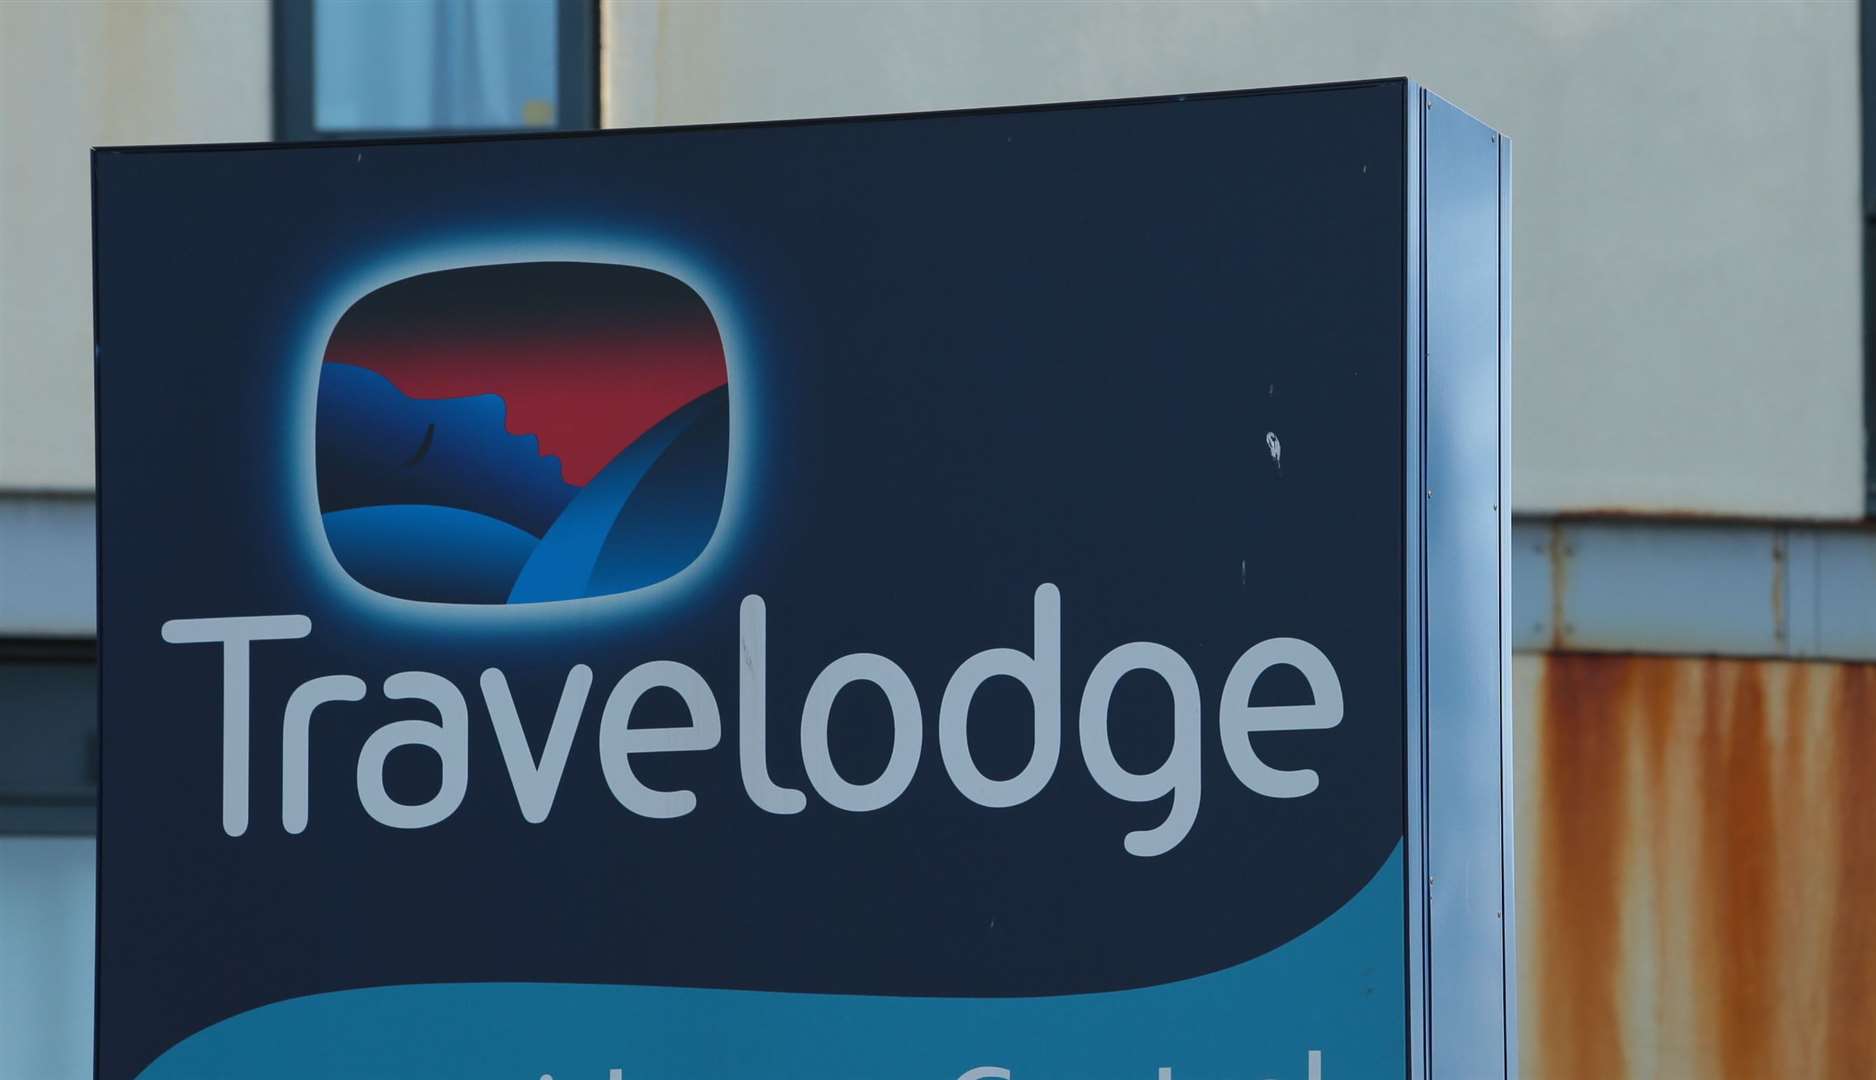 Travelodge will house up to 57 rough sleepers as part of the deal